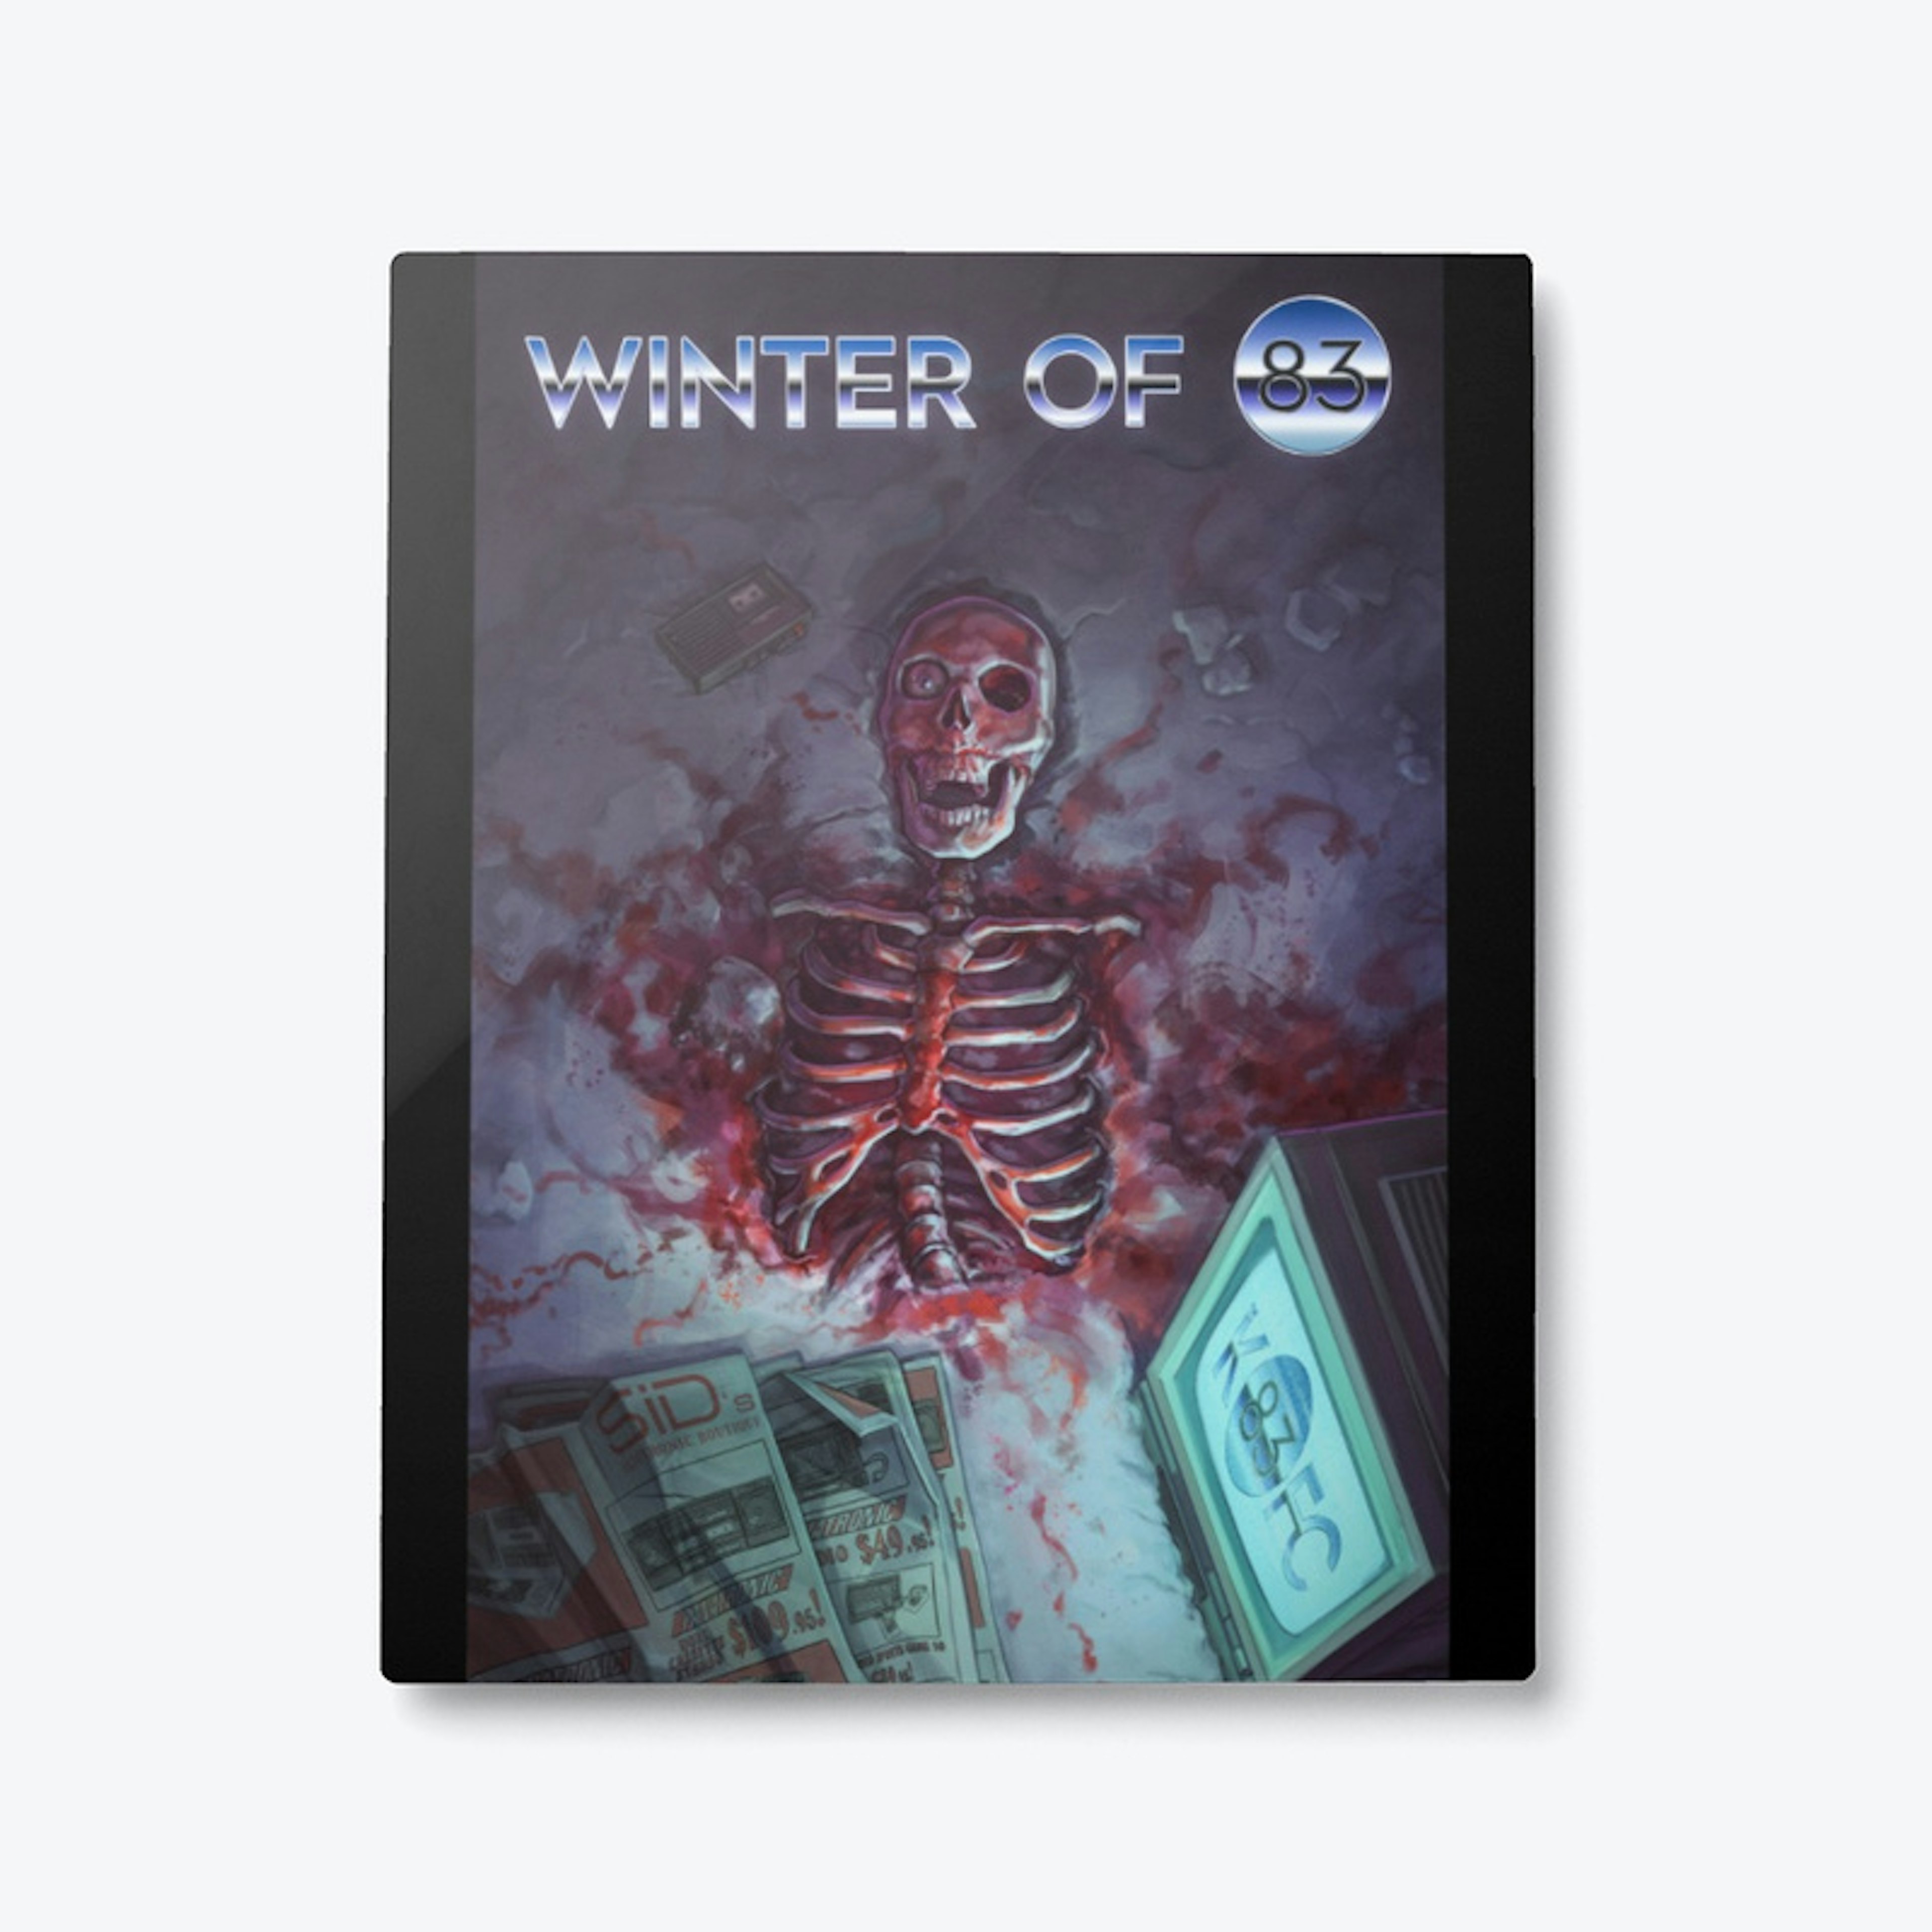 Winter of '83 Poster